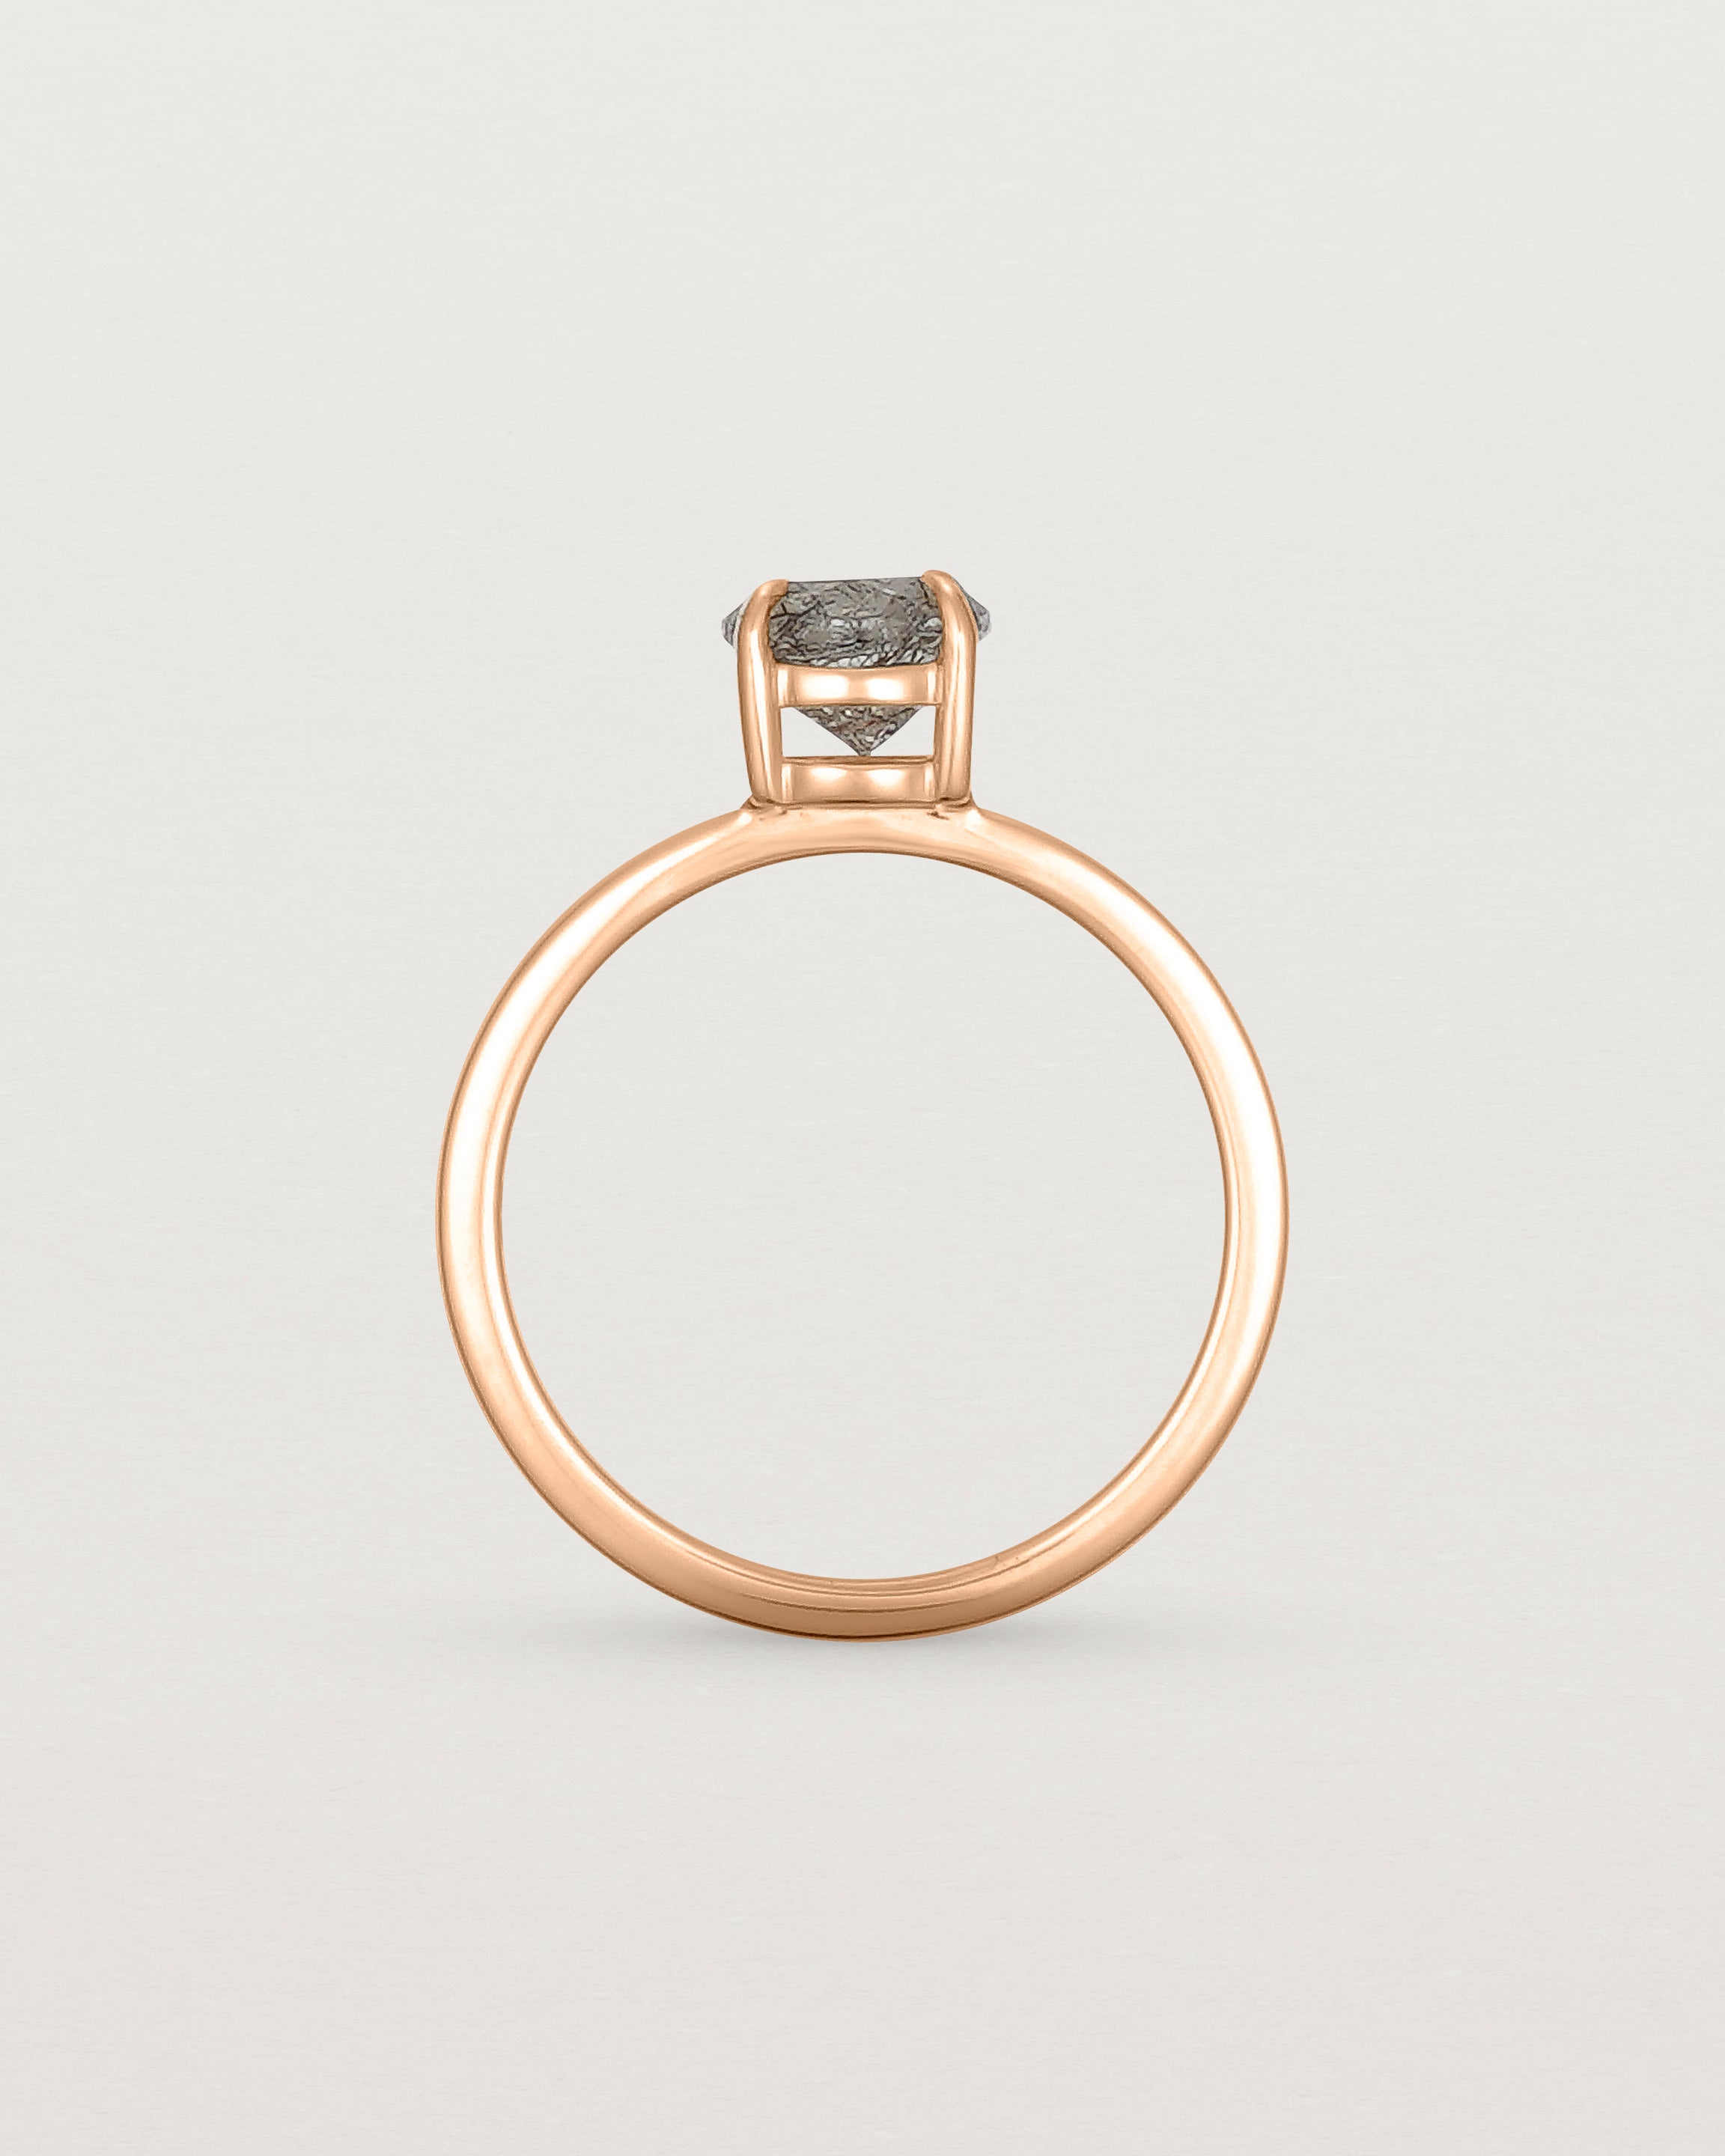 Standing view of the Petite Una Round Solitaire | Tourmalinated Quartz | Rose Gold.